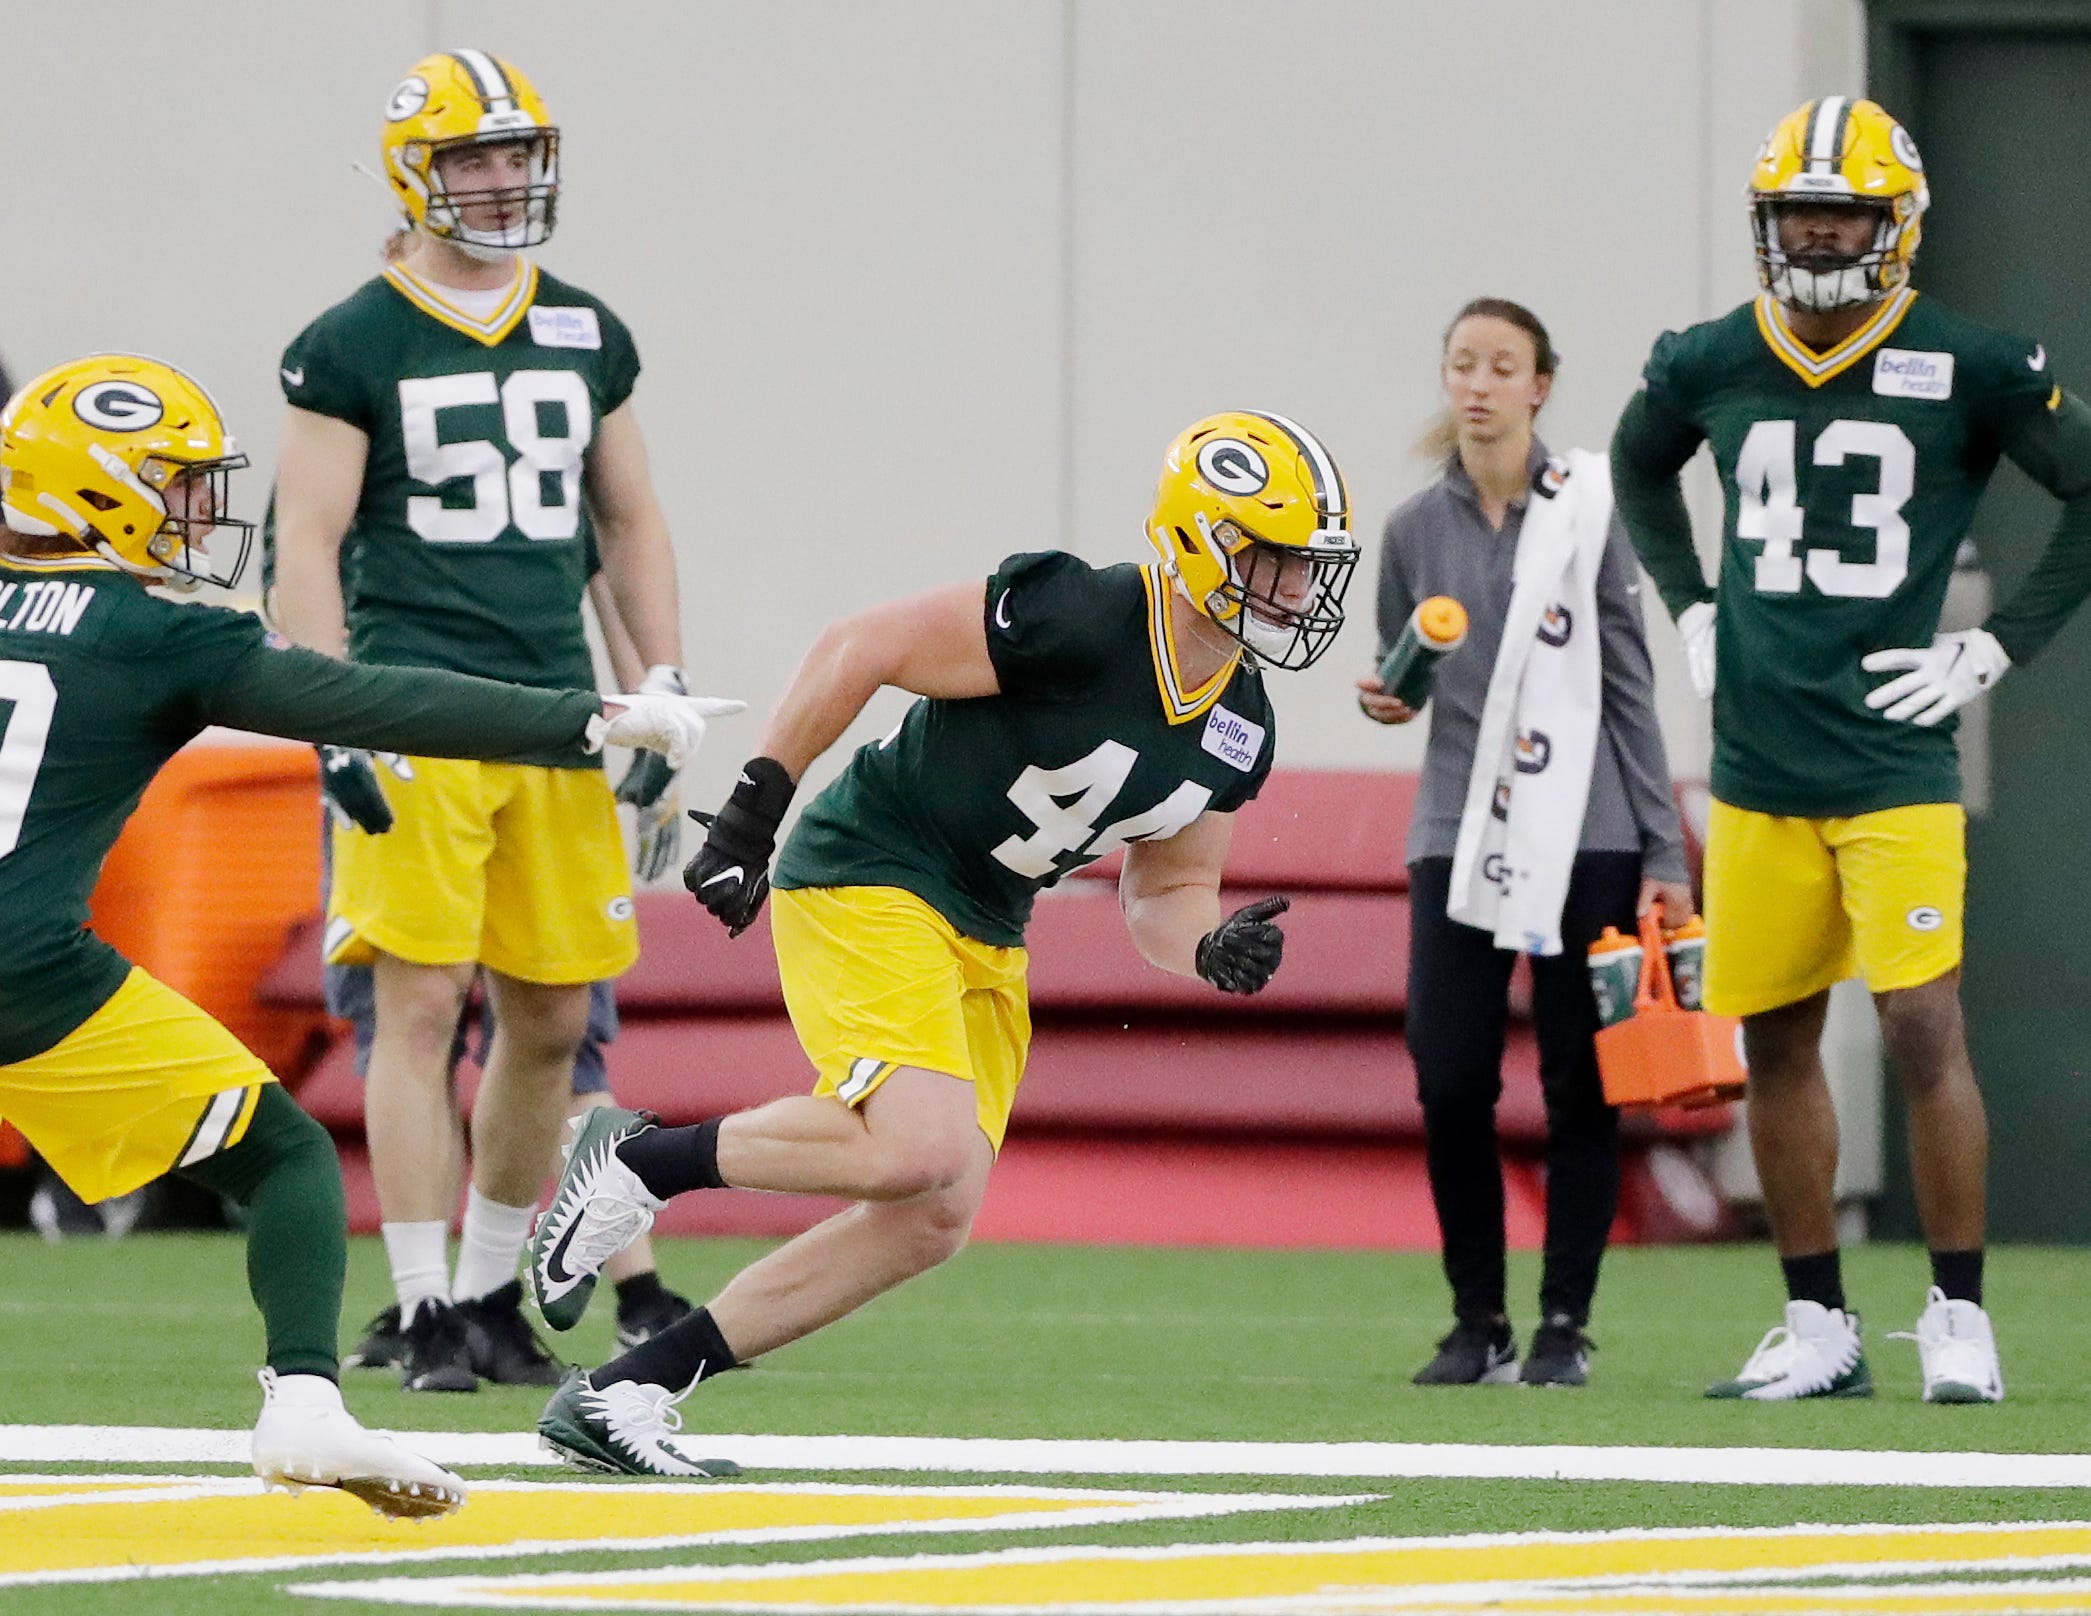 Green Bay Packers linebacker Ty Summers (44) during practice at rookie minicamp at the Don Hutson Center on Friday, May 3, 2019 in Ashwaubenon, Wis.
Adam Wesley/USA TODAY NETWORK-Wis